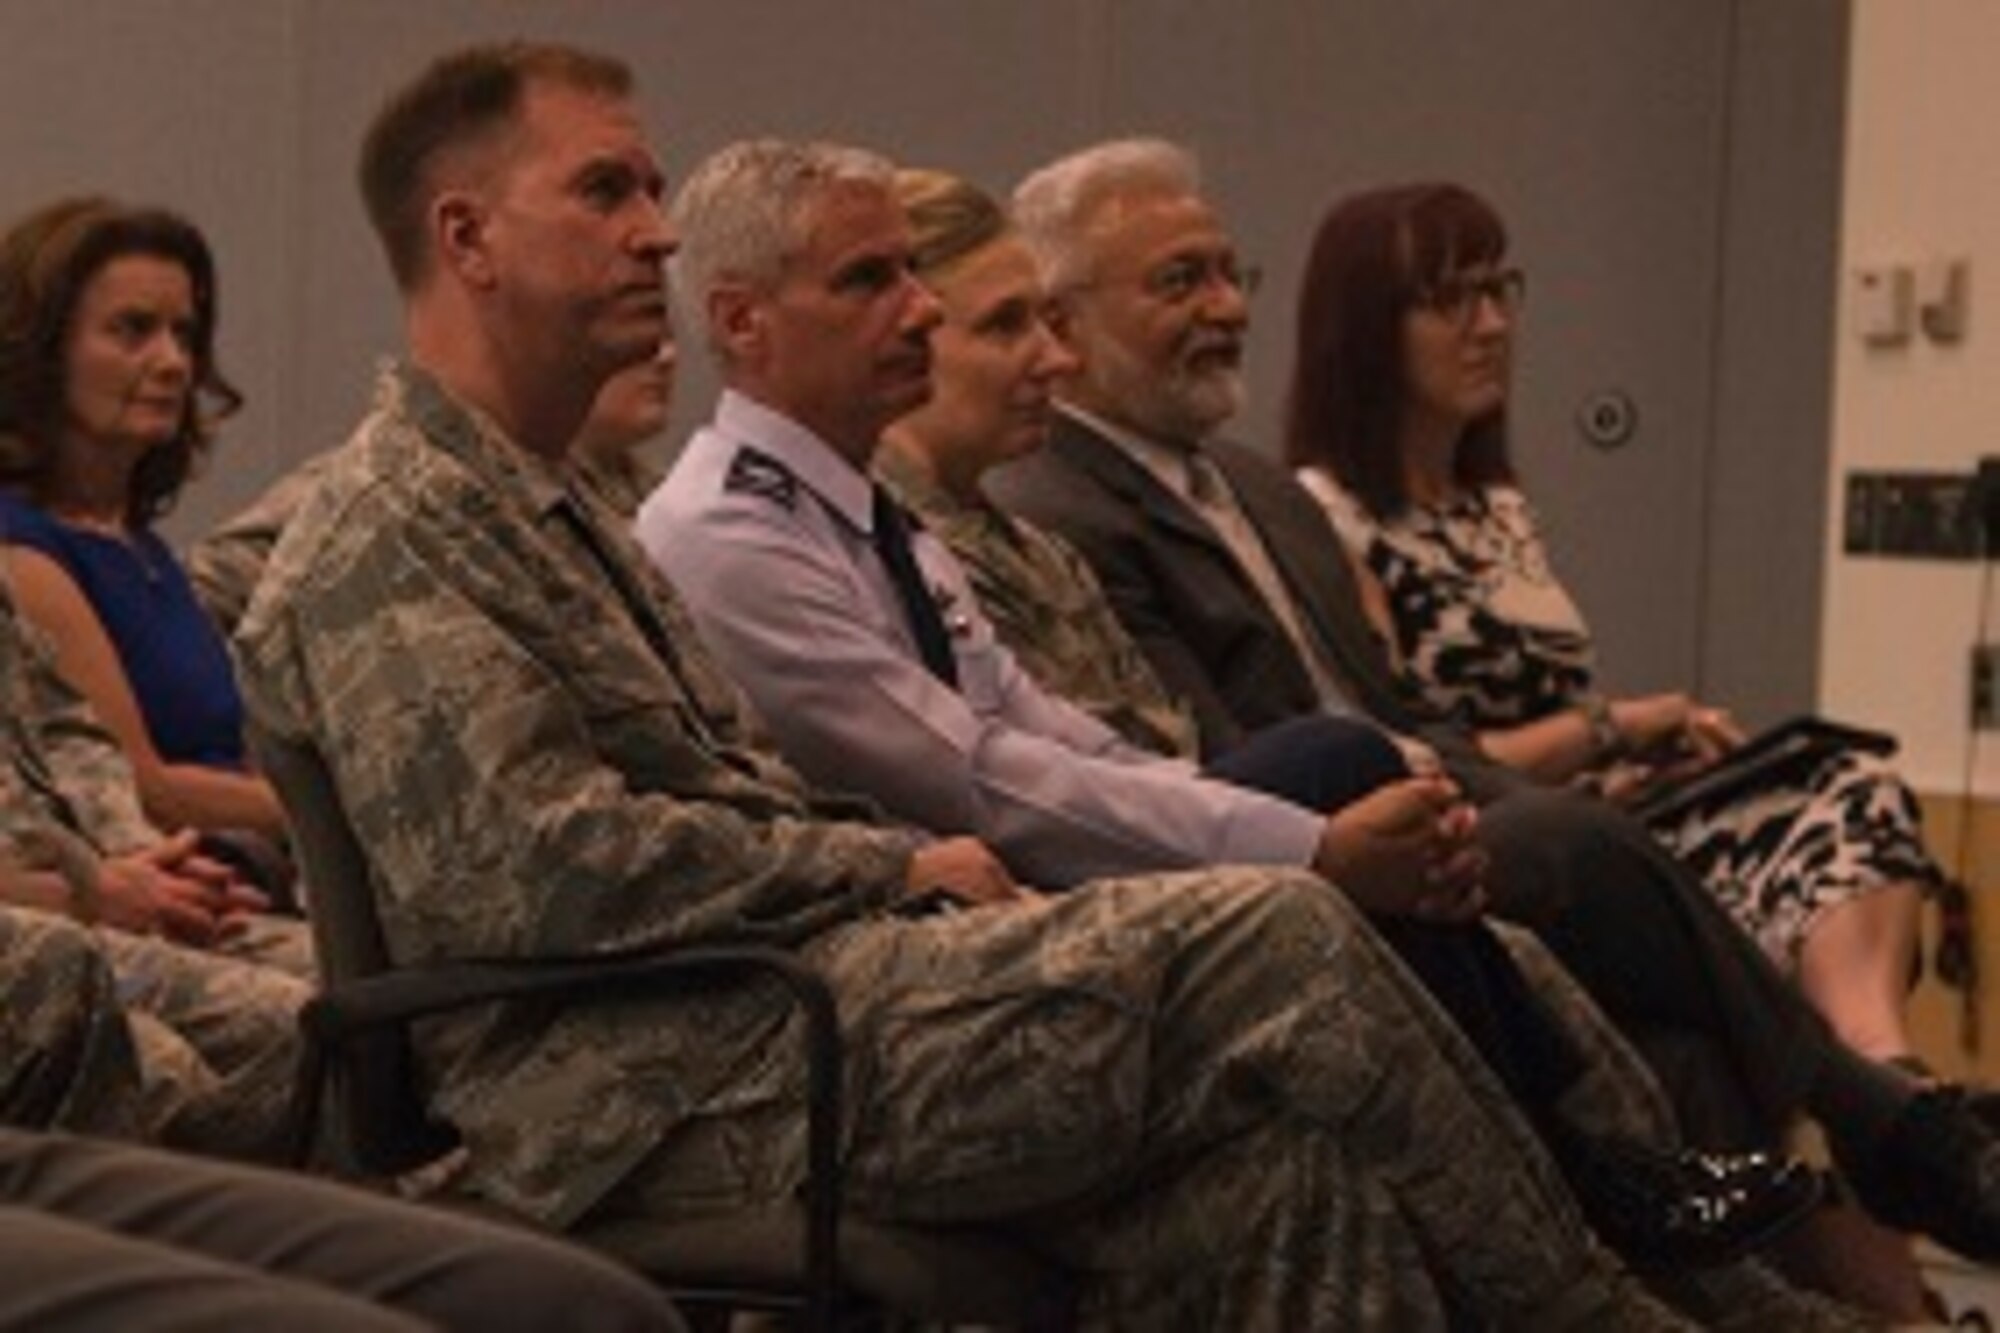 Audience members watch a video about Capt. David Schonberg, 113th Wing personnel officer, during a Lesbian, Gay, Bisexual and Transgender Pride Month special observance titled ‘LGBT: I am an American Airman’ at Joint Base Andrews, Md., June 29, 2017. The video highlighted Schonberg’s life, experience and extraordinary contributions as an openly gay military member. (U.S. Air Force photo by Airman 1st Class Valentina Lopez)